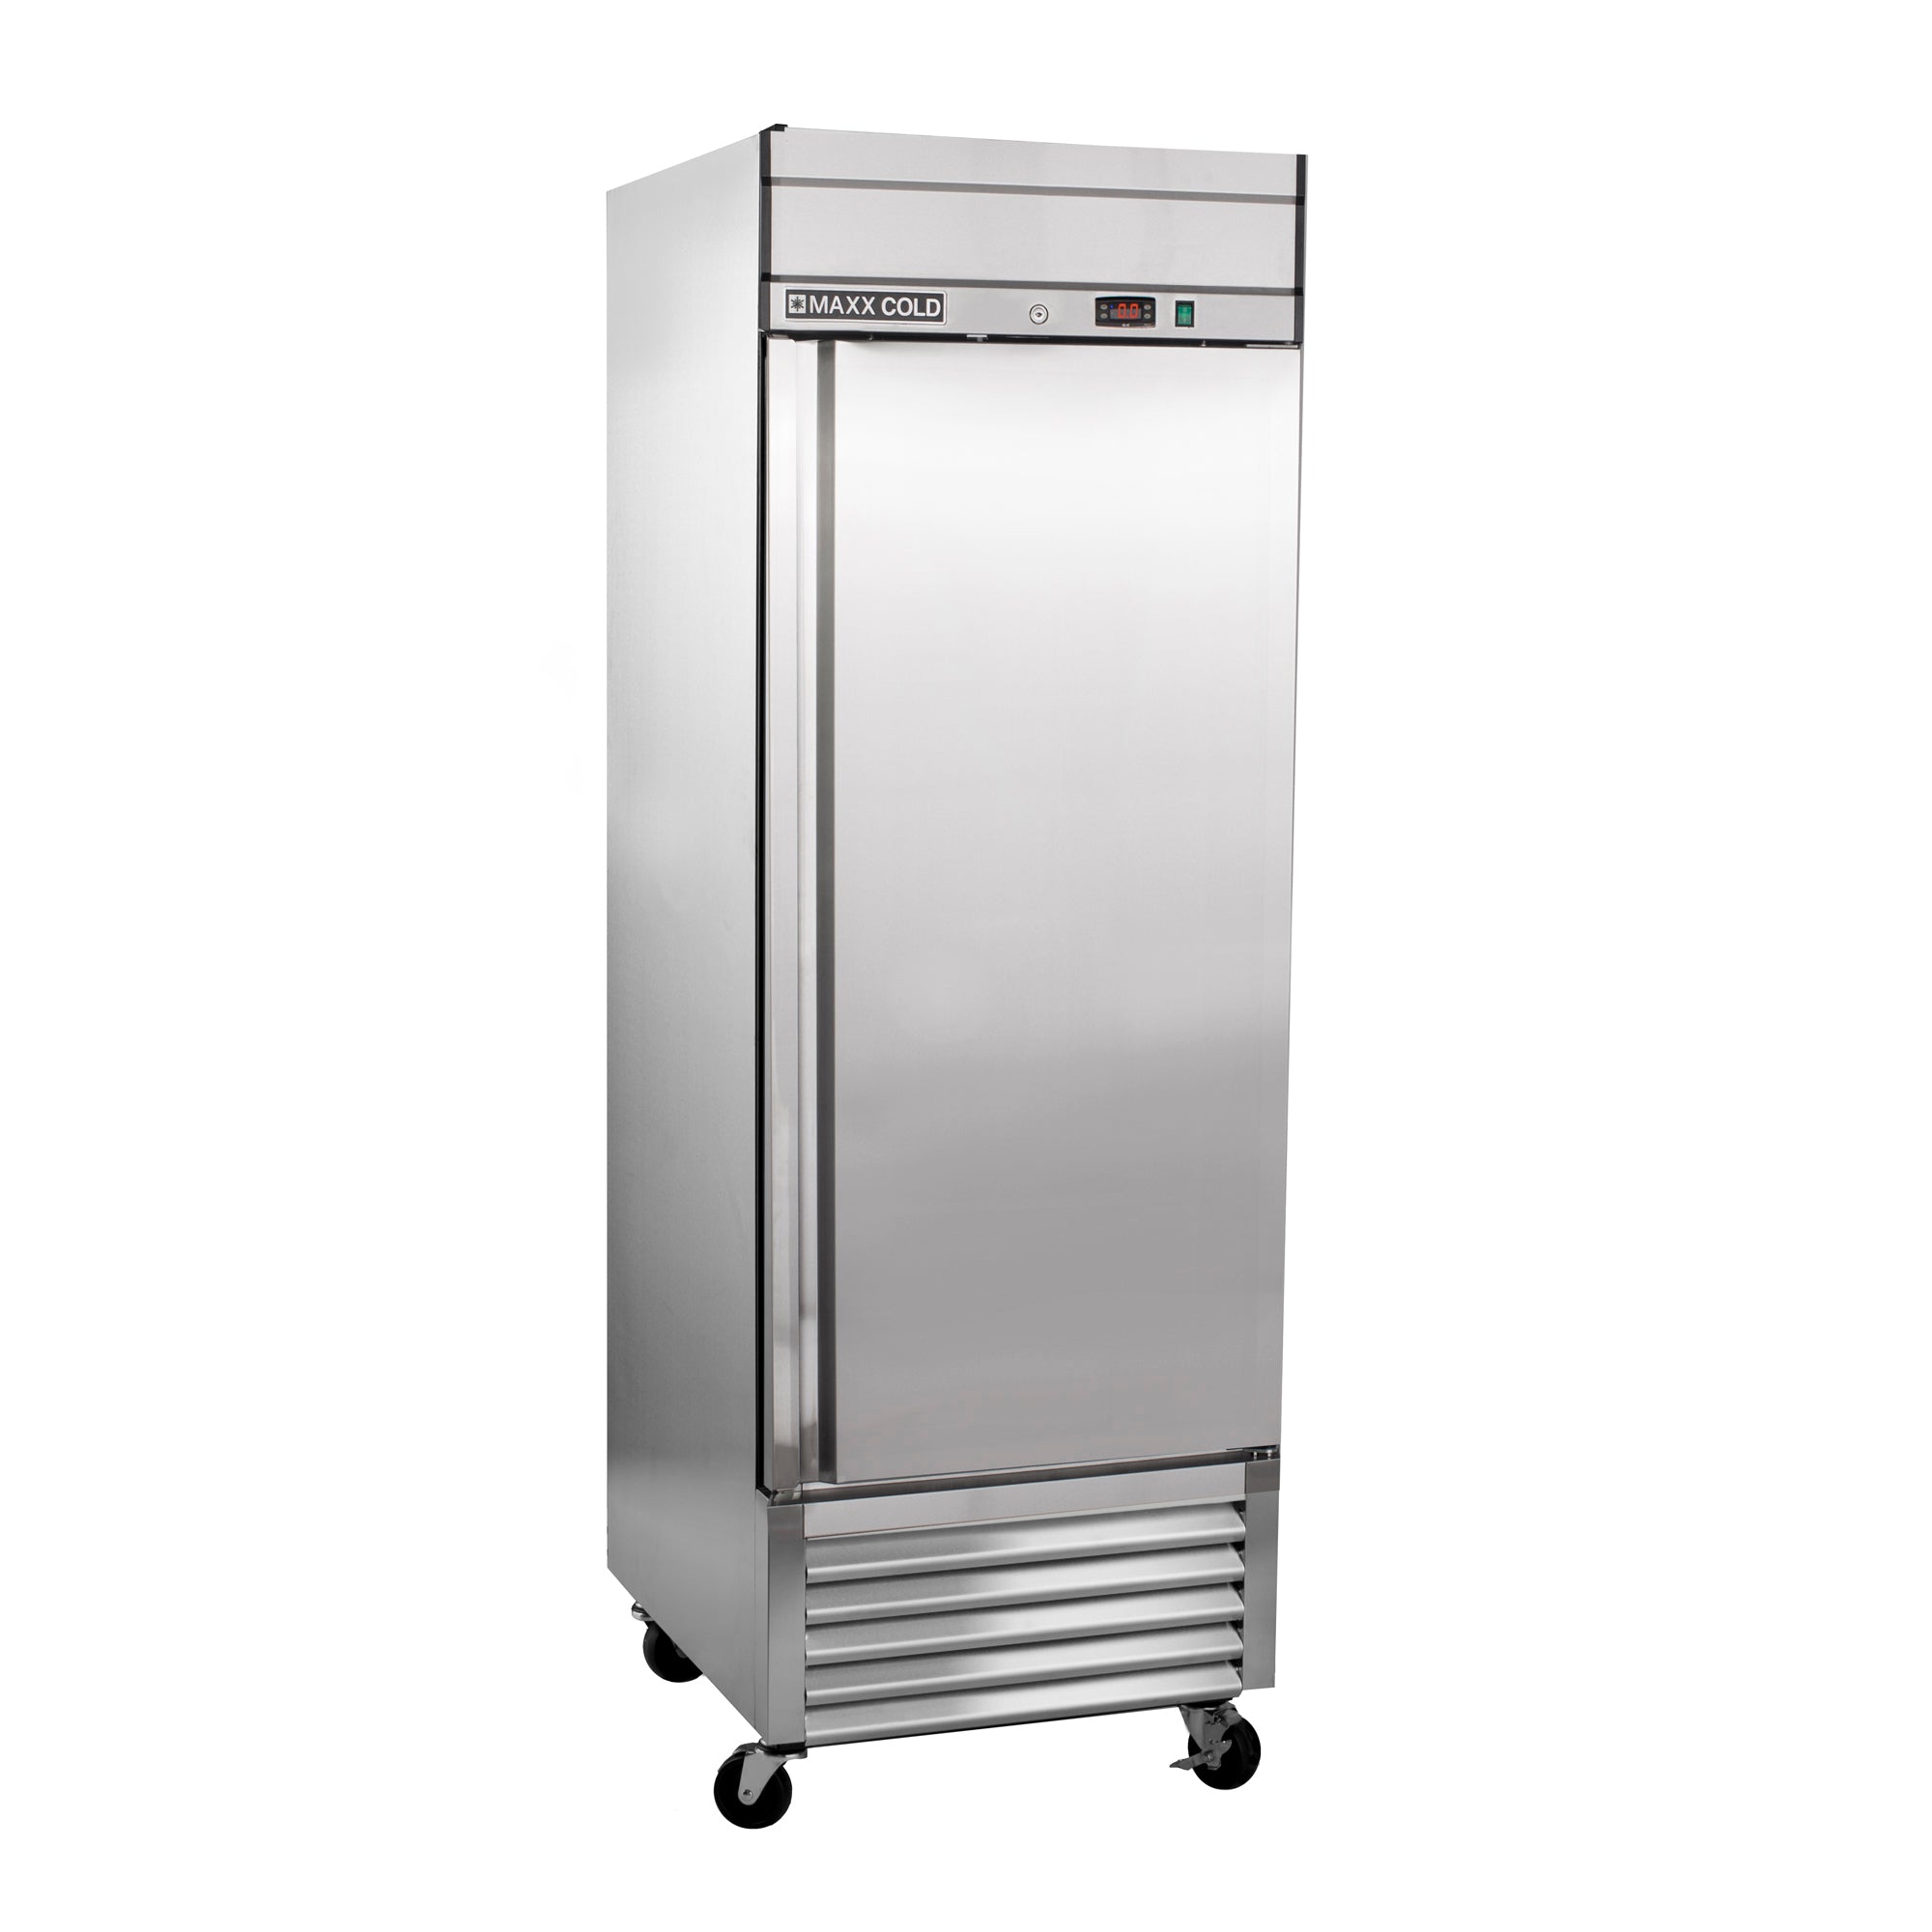 Maxx Cold - MXSF-23FDHC, Maxx Cold Bottom Mount 1 Door Reach-In Freezer, 27" W, 19.3 Cu Ft, in Stainless Steel